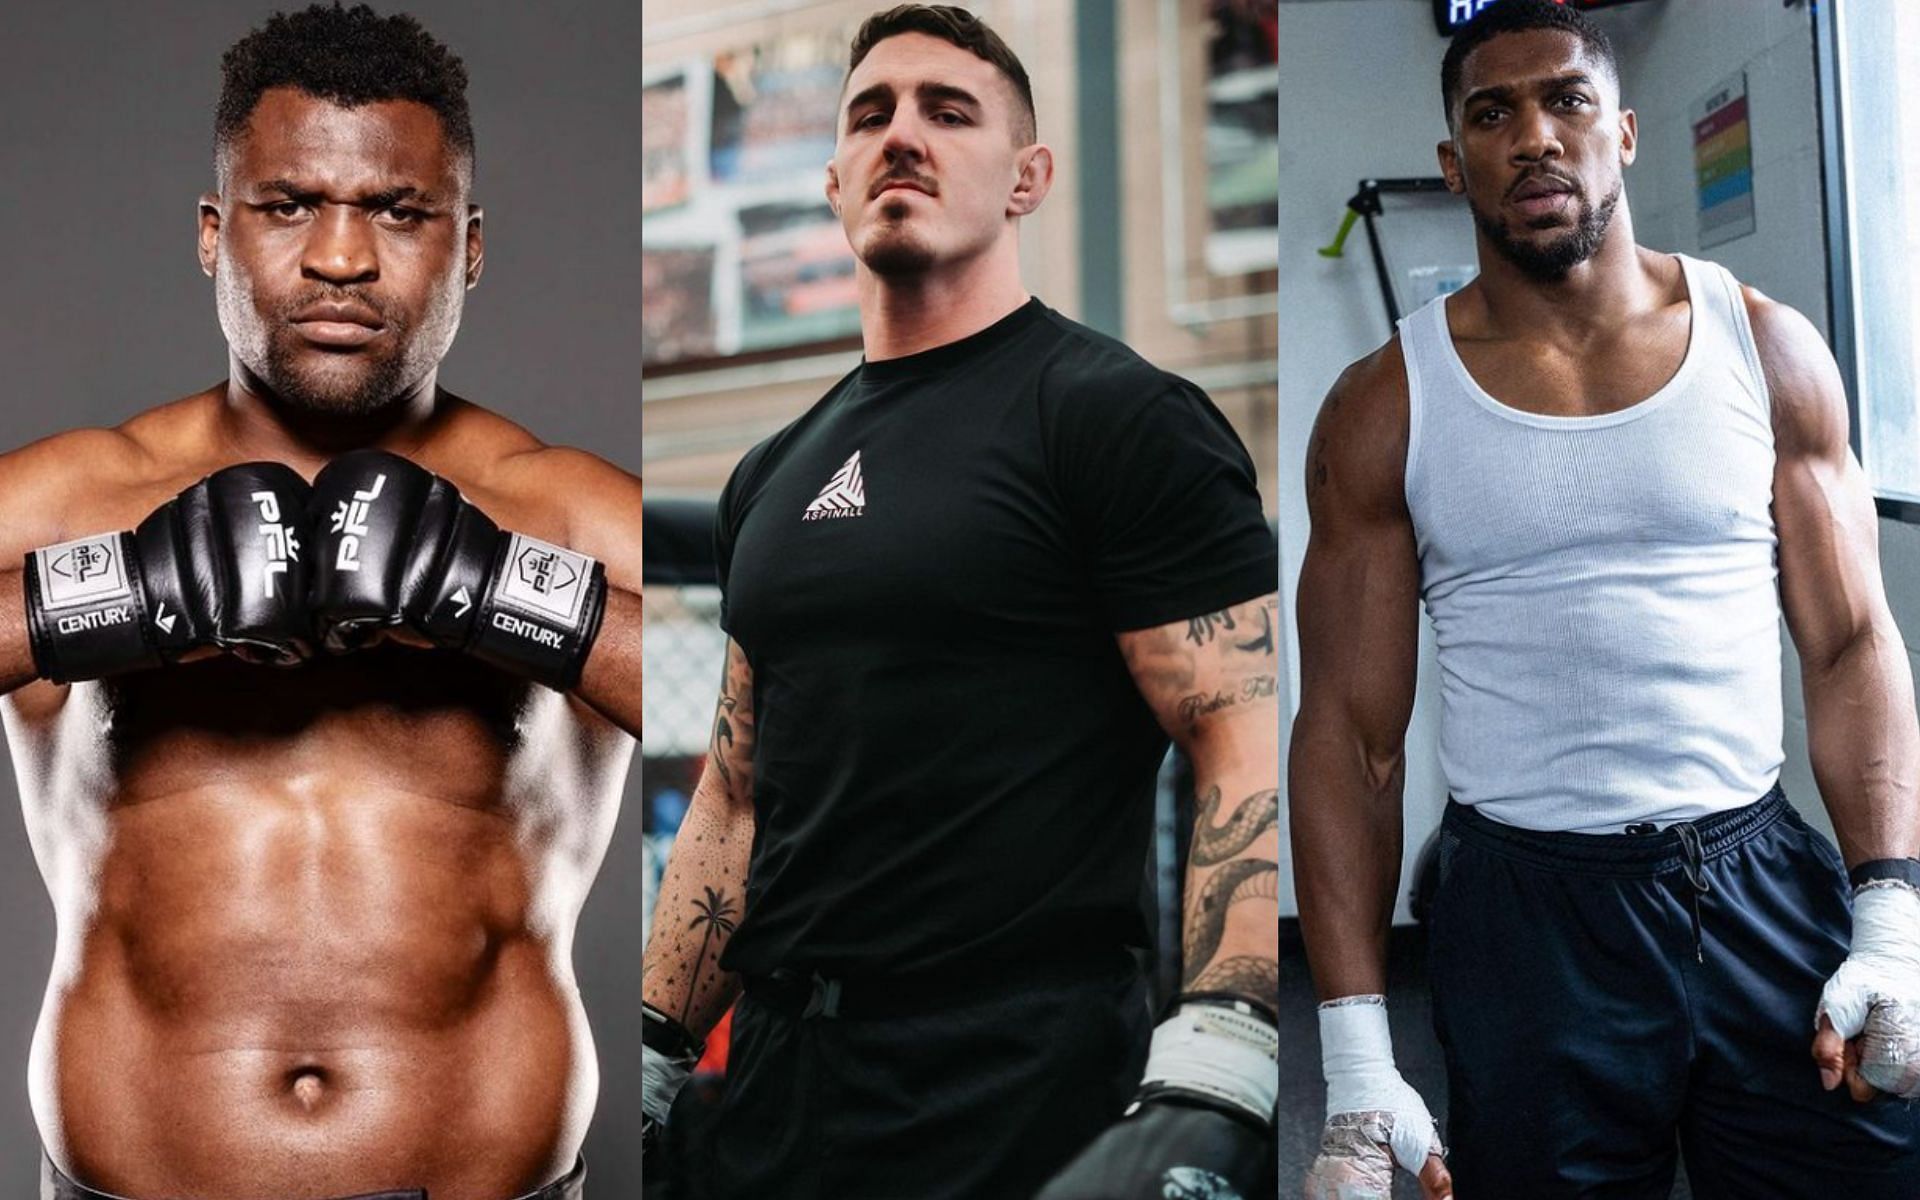 Tom Aspinall (middle) breaks down Francis Ngannou (left) versus Anthony Joshua (right) in MMA [Images Courtesy: @anthonyjoshua, @francisngannou and @tomaspinallofficial on Instagram]